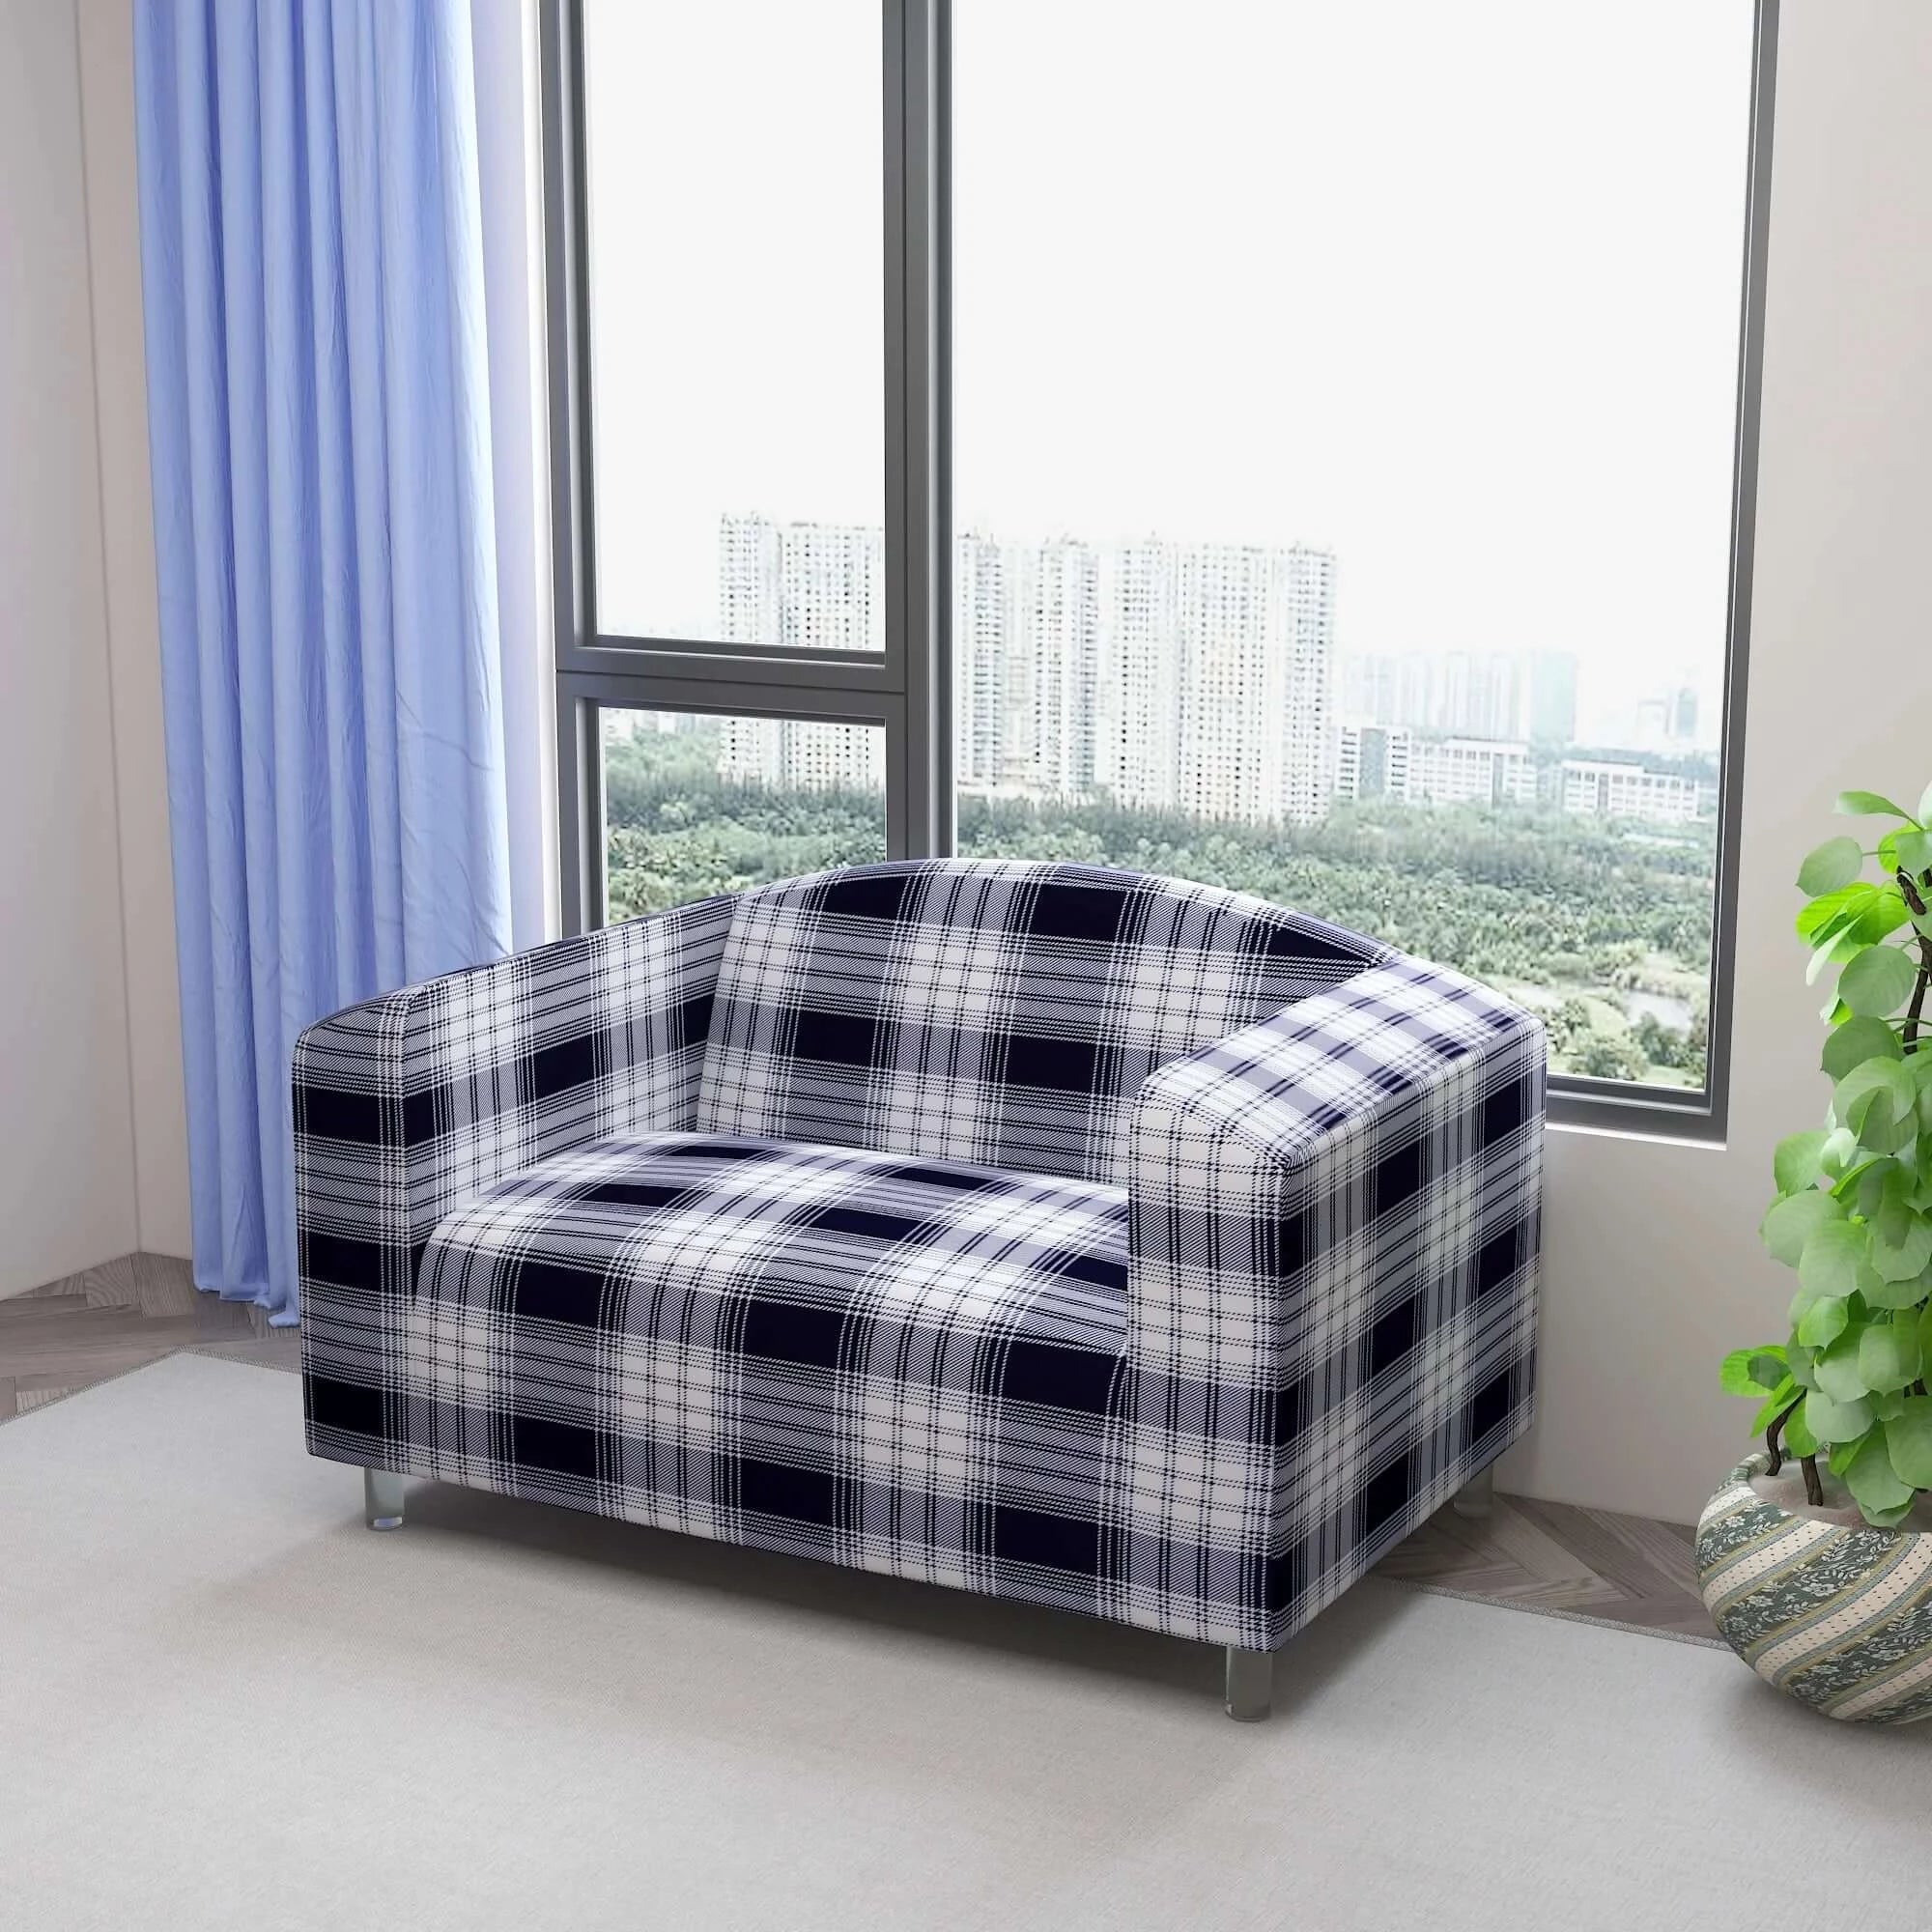 Marigold Printed Sofa Protector Cover Full Stretchable, MG08 - Dream Care Furnishings Private Limited